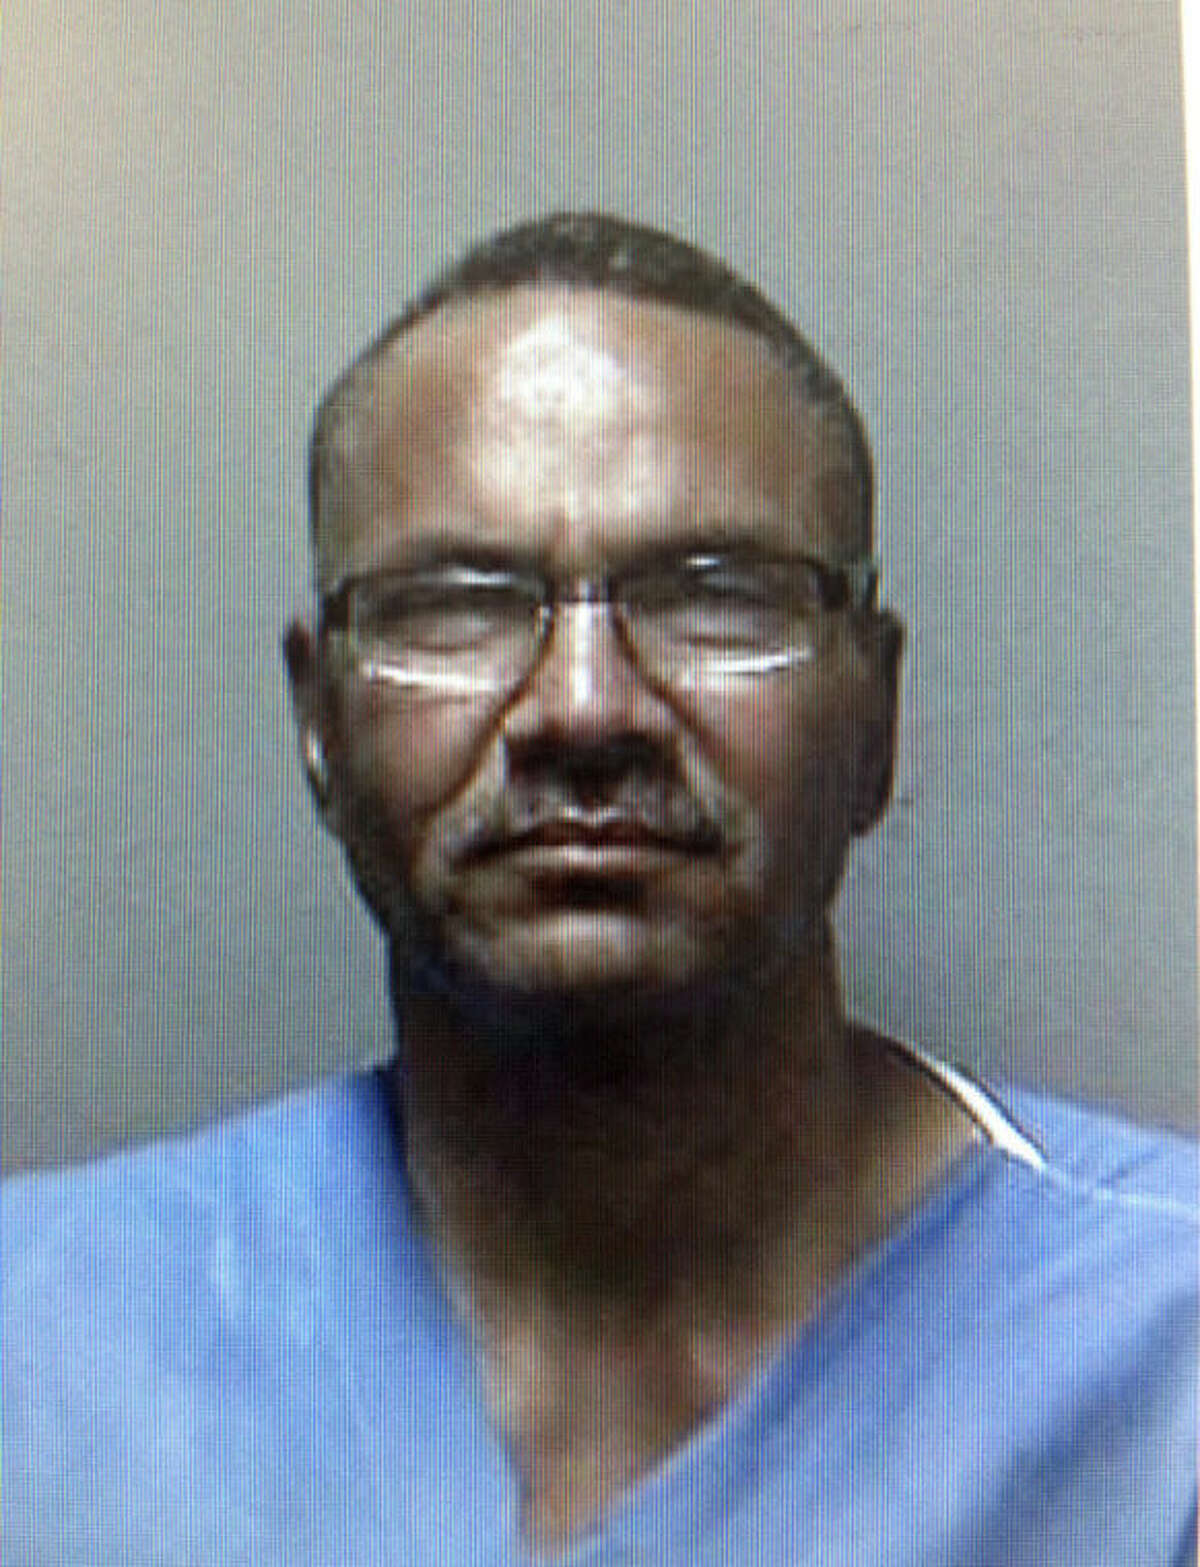 This image provided by the Oakland Police Department shows an undated booking photo of Randy Alana, 56. Oakland Police Officer Johnna Watson said Alana, a parolee from Oakland, was taken into custody on Tuesday Aug. 6, 2013 and is being questioned about his ties to Sandra Coke after investigators discovered he was with Coke on Sunday. Coke, a capital case investigator for the federal public defender's office in Sacramento, was last seen in Oakland on Sunday. (AP Photo/Oakland Police Department)